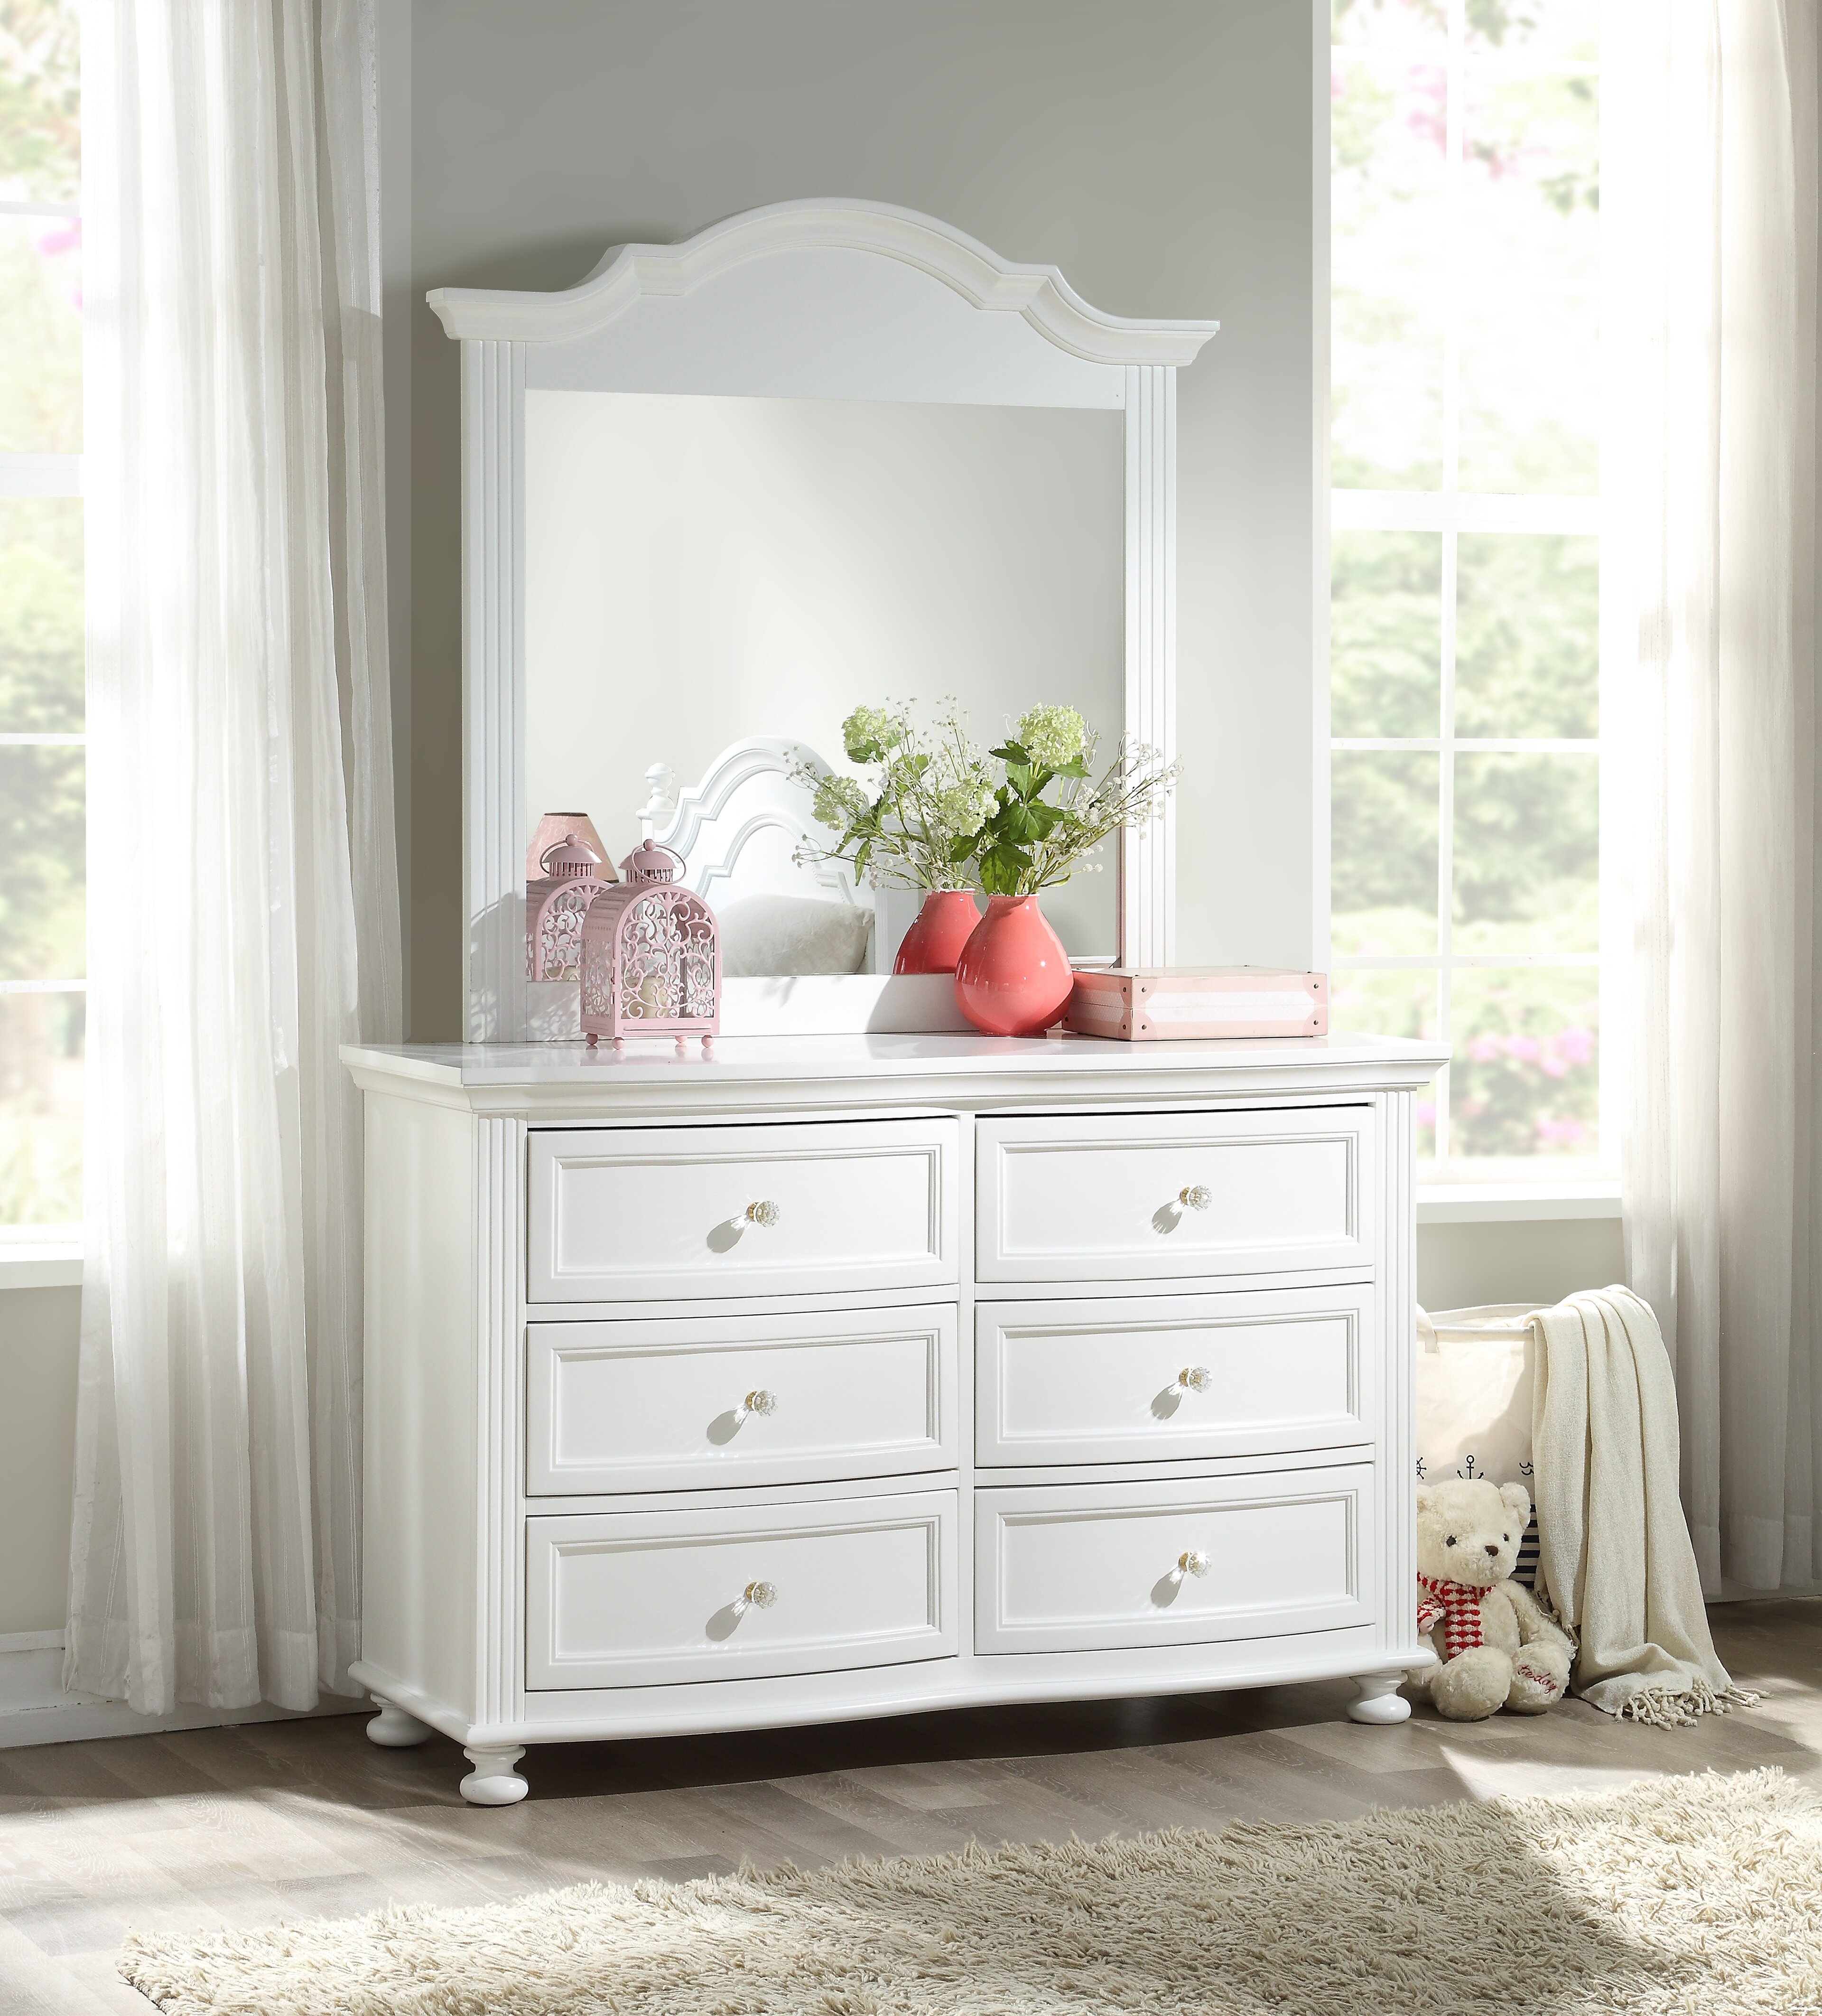 Harriet Bee Narelle Princess 6 Drawer Double Dresser With Mirror